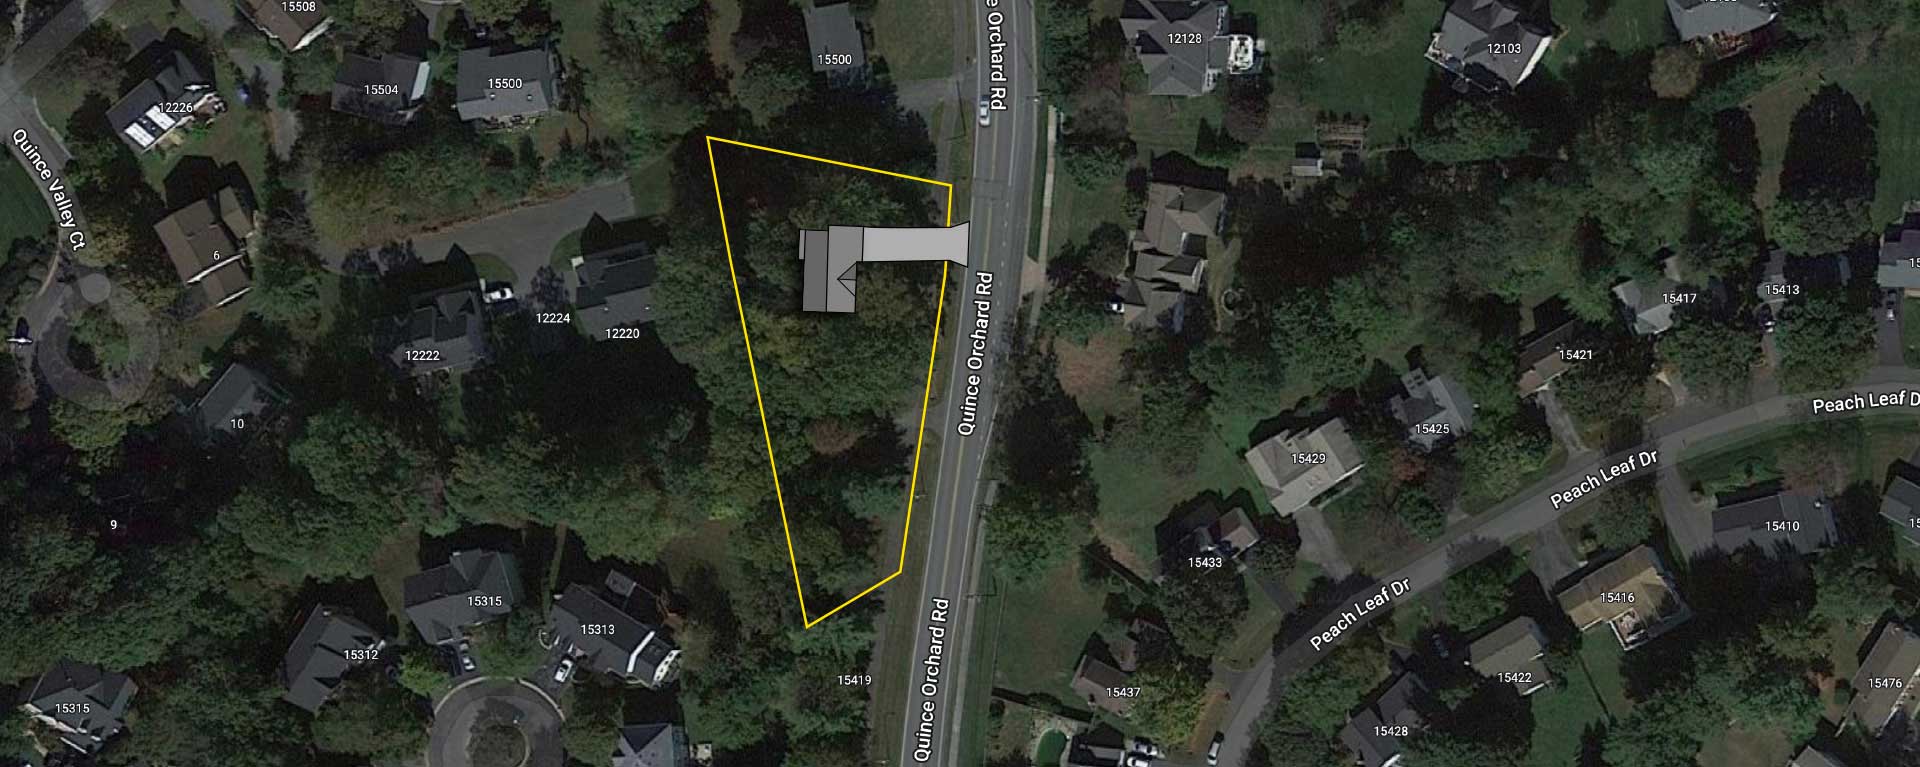 A satellite image showing the site outline and house placement for the lot at 15426 Quince Orchard Rd.